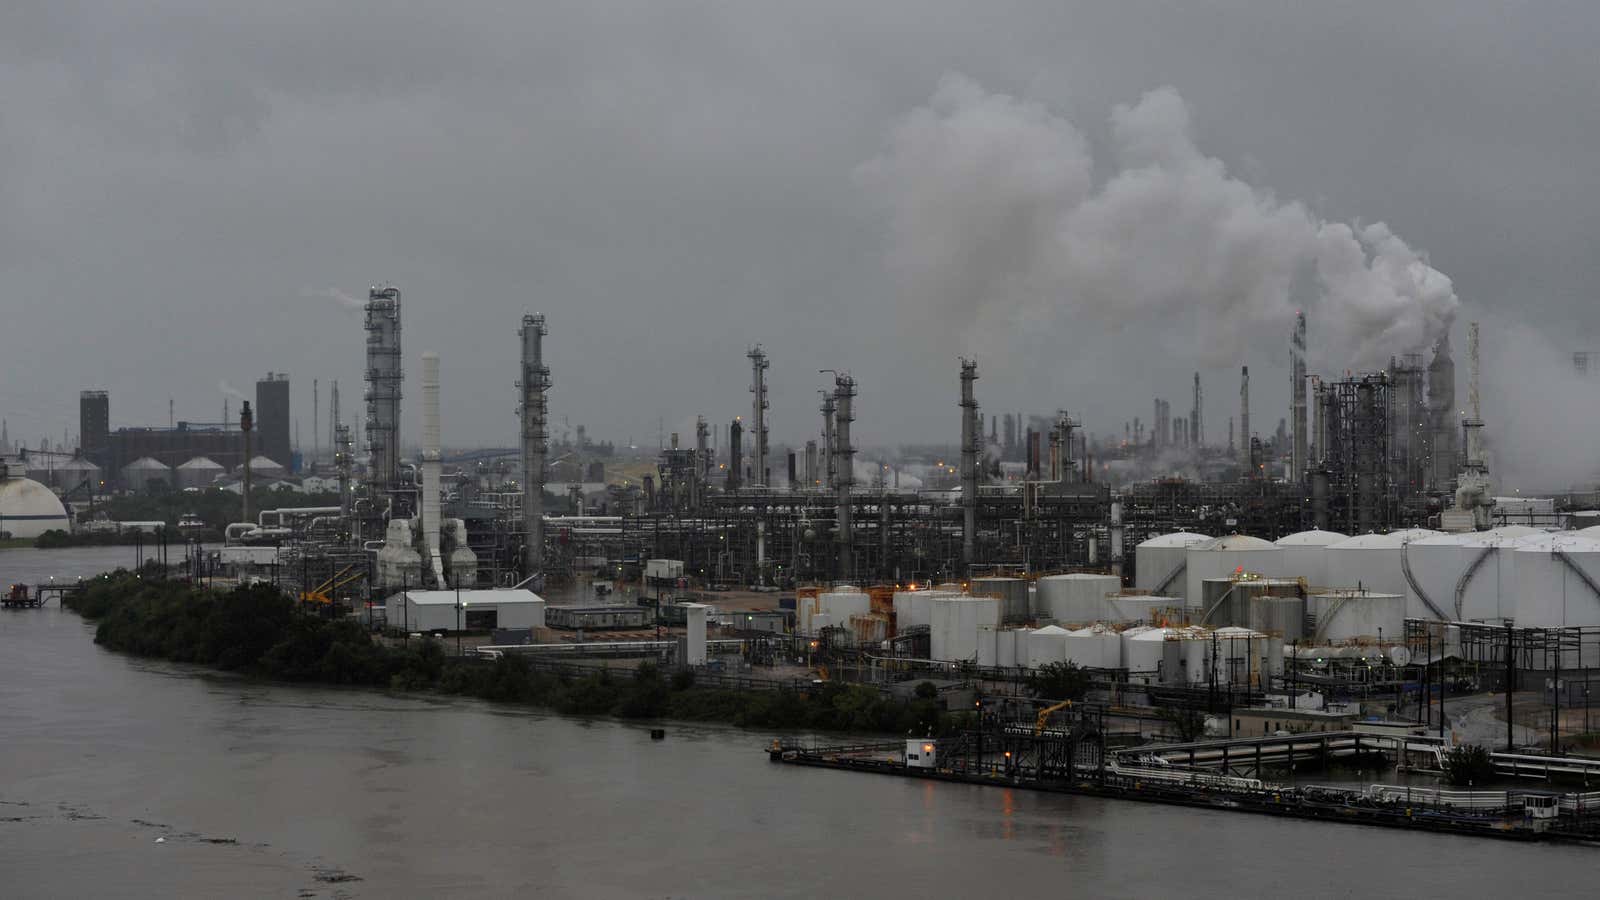 When refineries shut down, they typically emit far more toxins than normal.